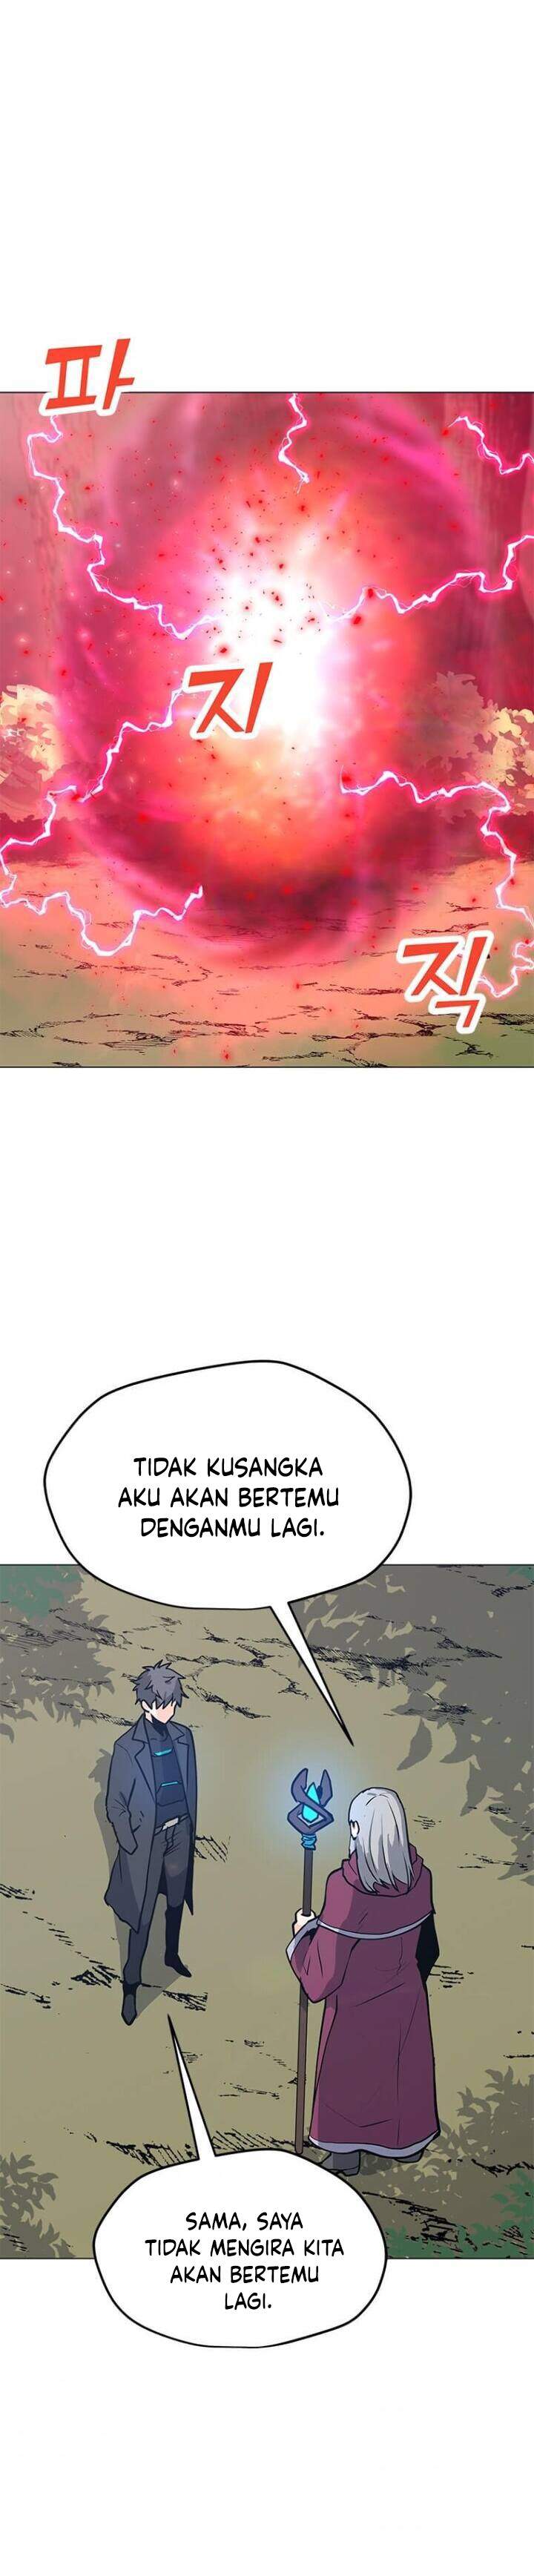 Solo Spell Caster Chapter 63